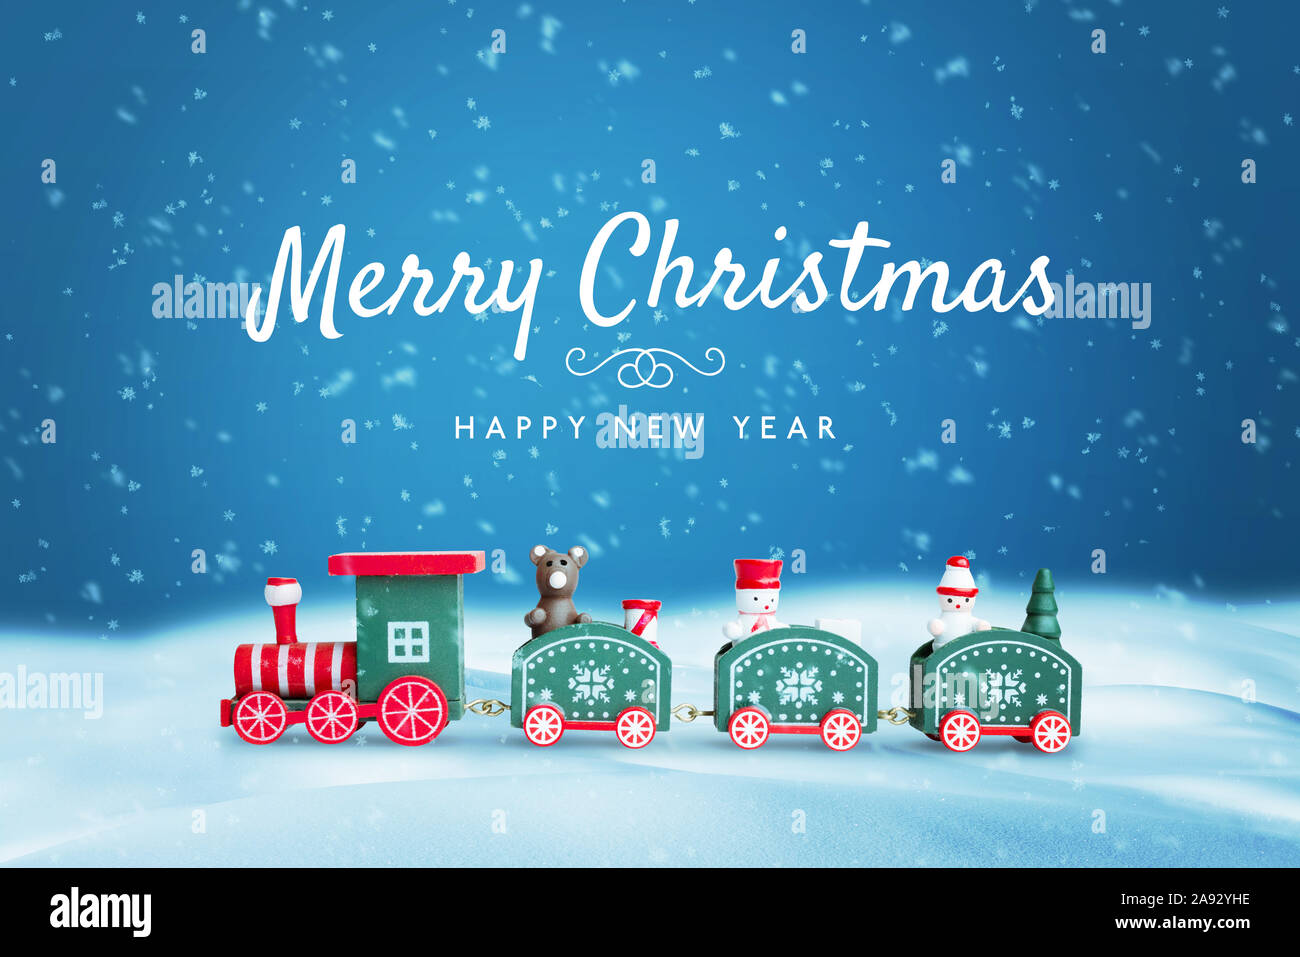 Cute wooden train in snow surrounded by a lot of snowflakes. Merry Christmas text on blue background. Christmas, New Year greeting card. Stock Photo